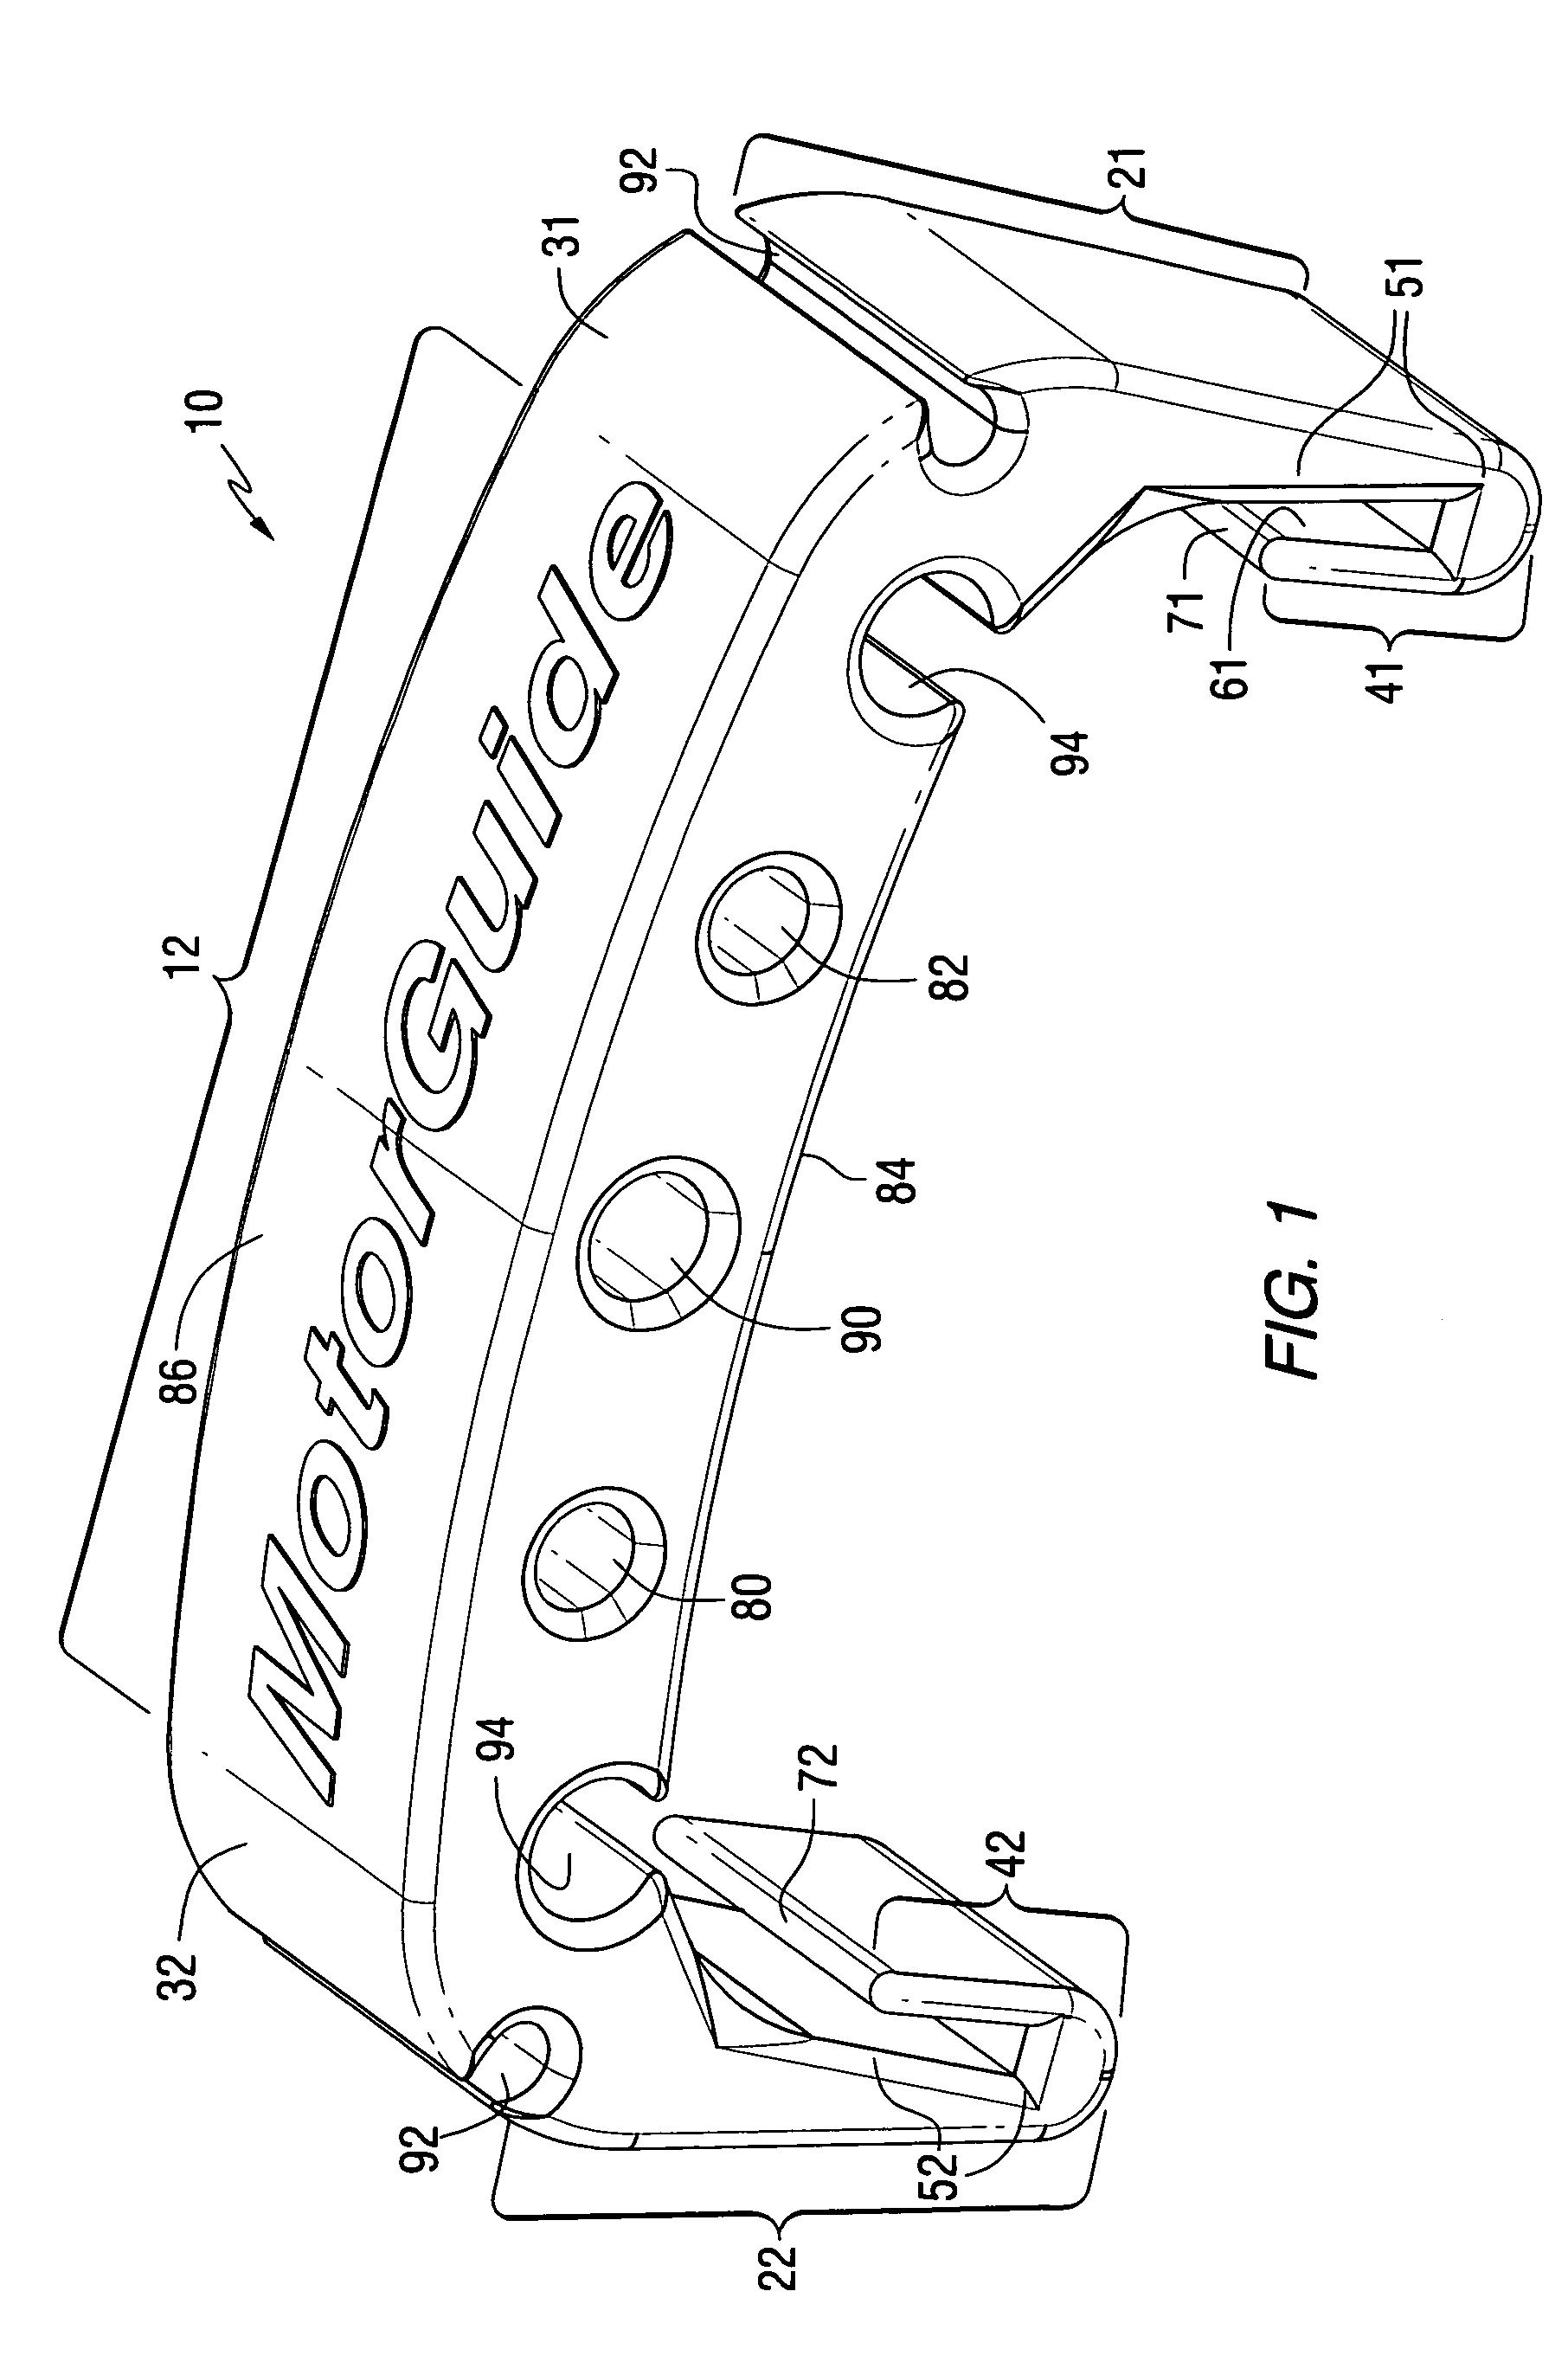 Support device for a trolling motor